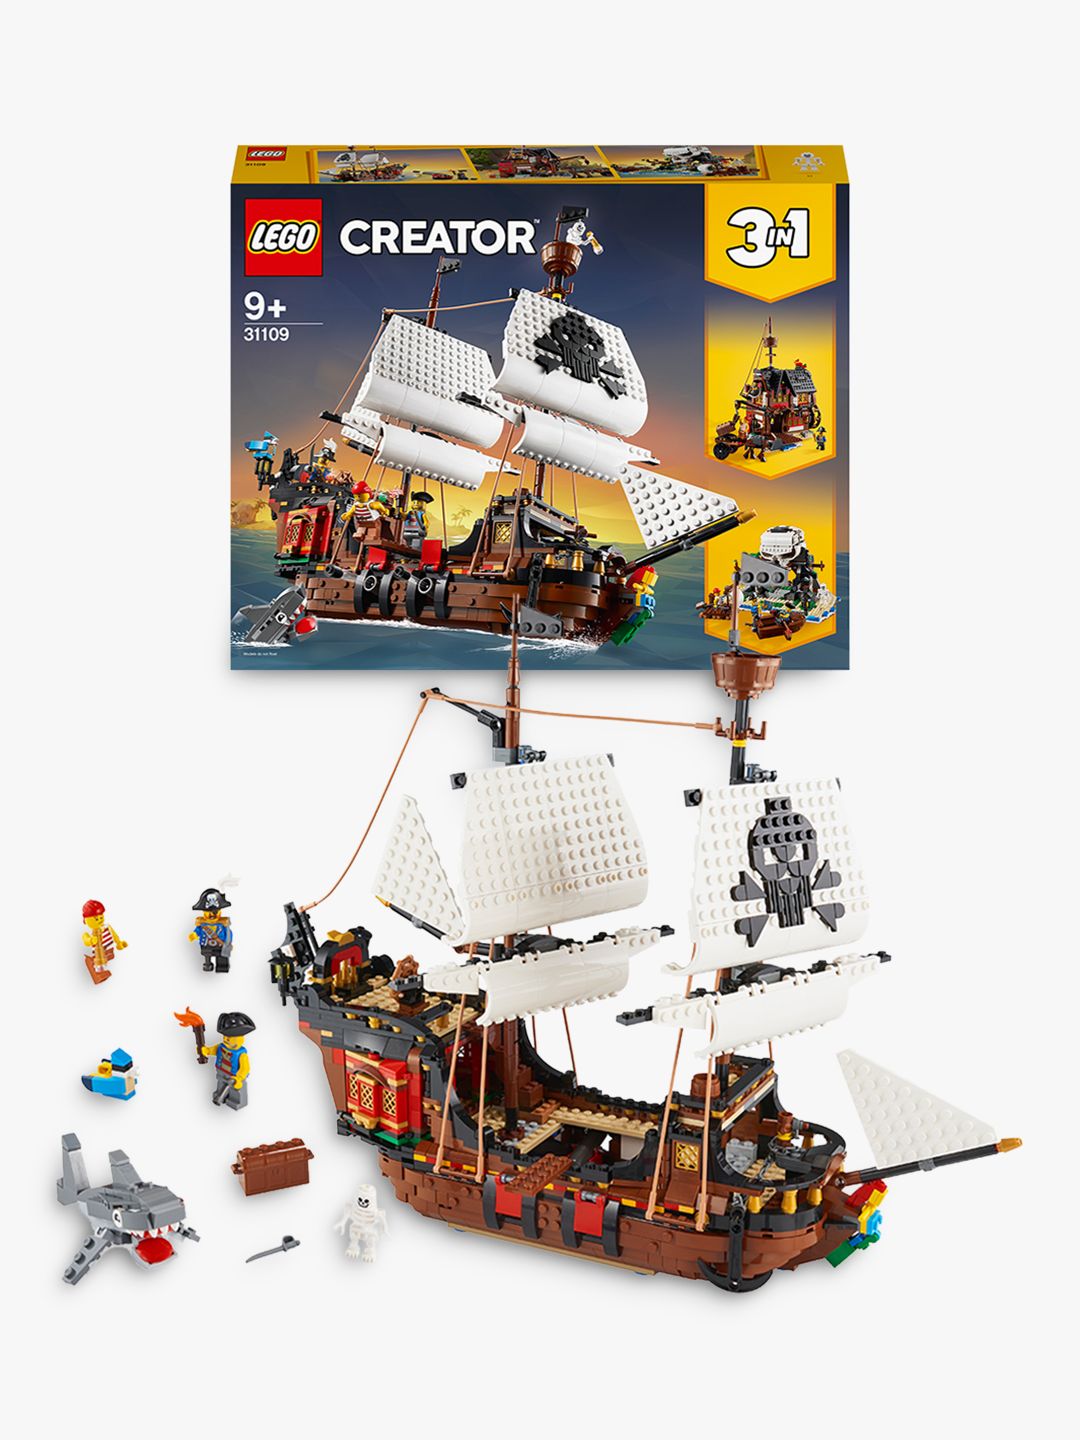 LEGO Creator 3 in 1 Pirate Ship Building Set, Kids can Rebuild the Pirate  Ship into an Inn or Skull Island, Features 4 Minifigures and Shark Toy,  Makes a Great Gift for